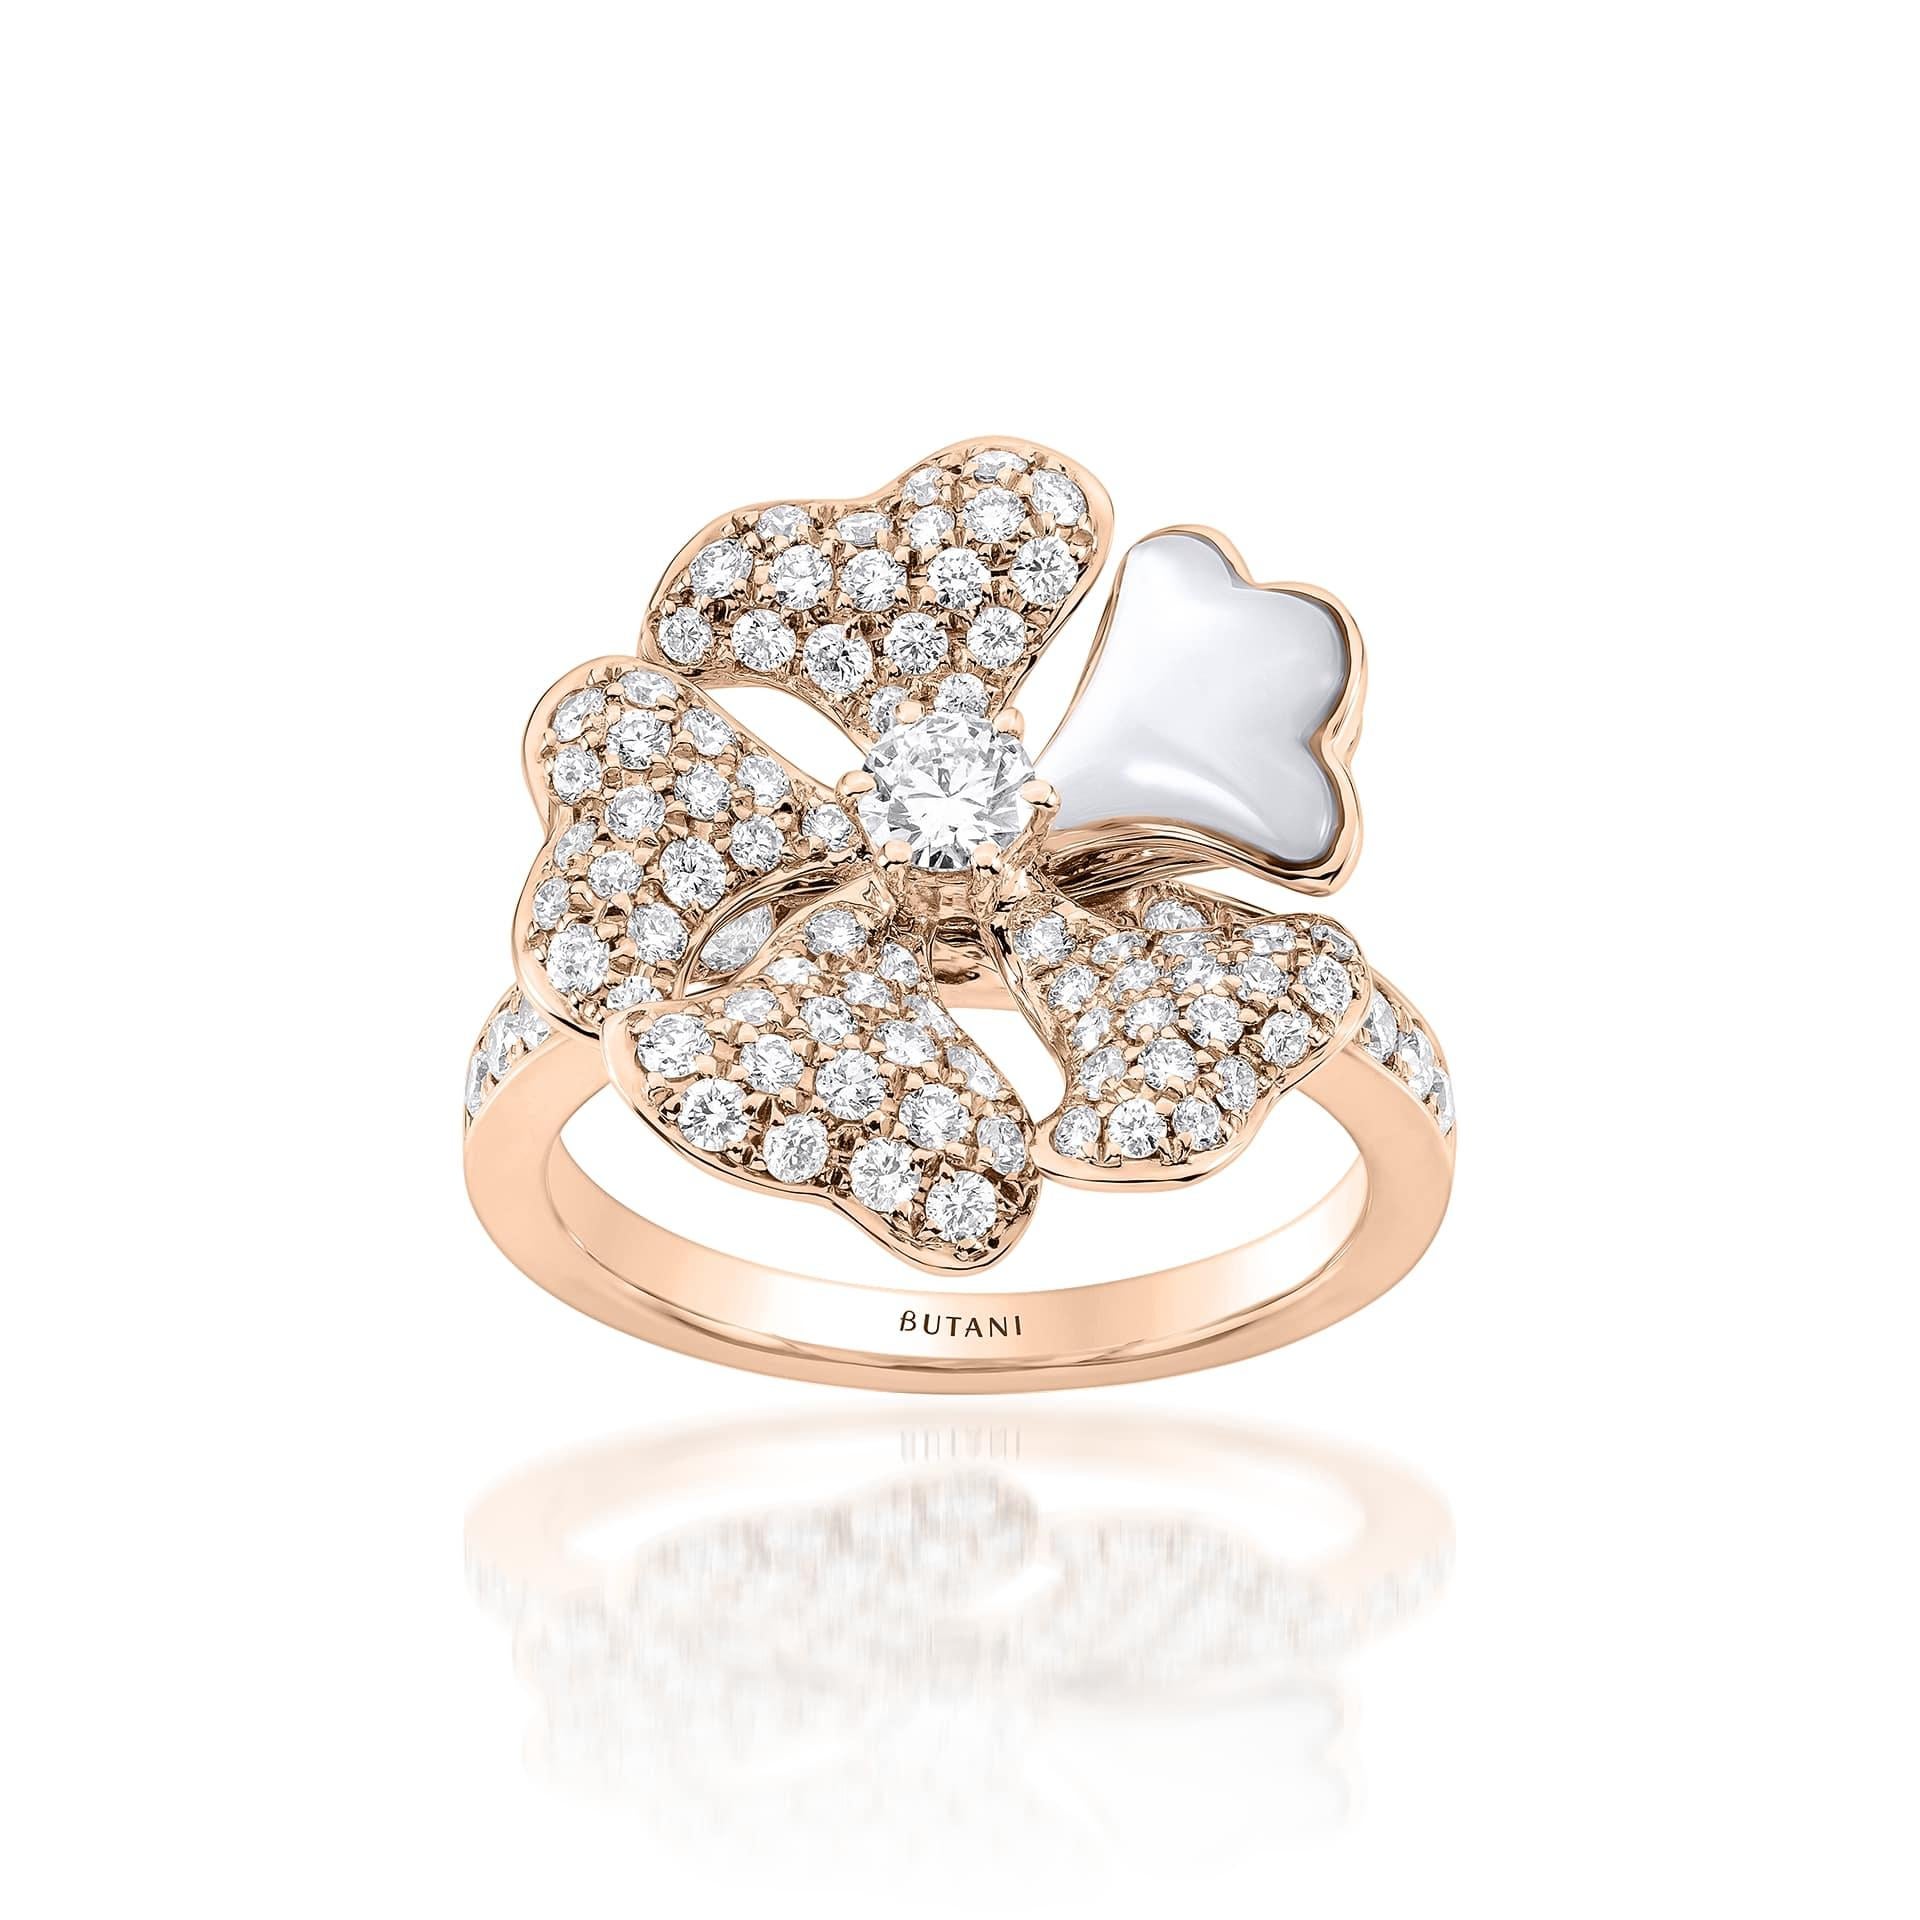 Bloom Mother-of-Pearl and Pavé Diamond Ring in 18K Rose Gold

Inspired by the exquisite petals of the alpine cinquefoil flower, the Bloom collection combines the richness of diamonds and precious metals with the light versatility of this delicate,